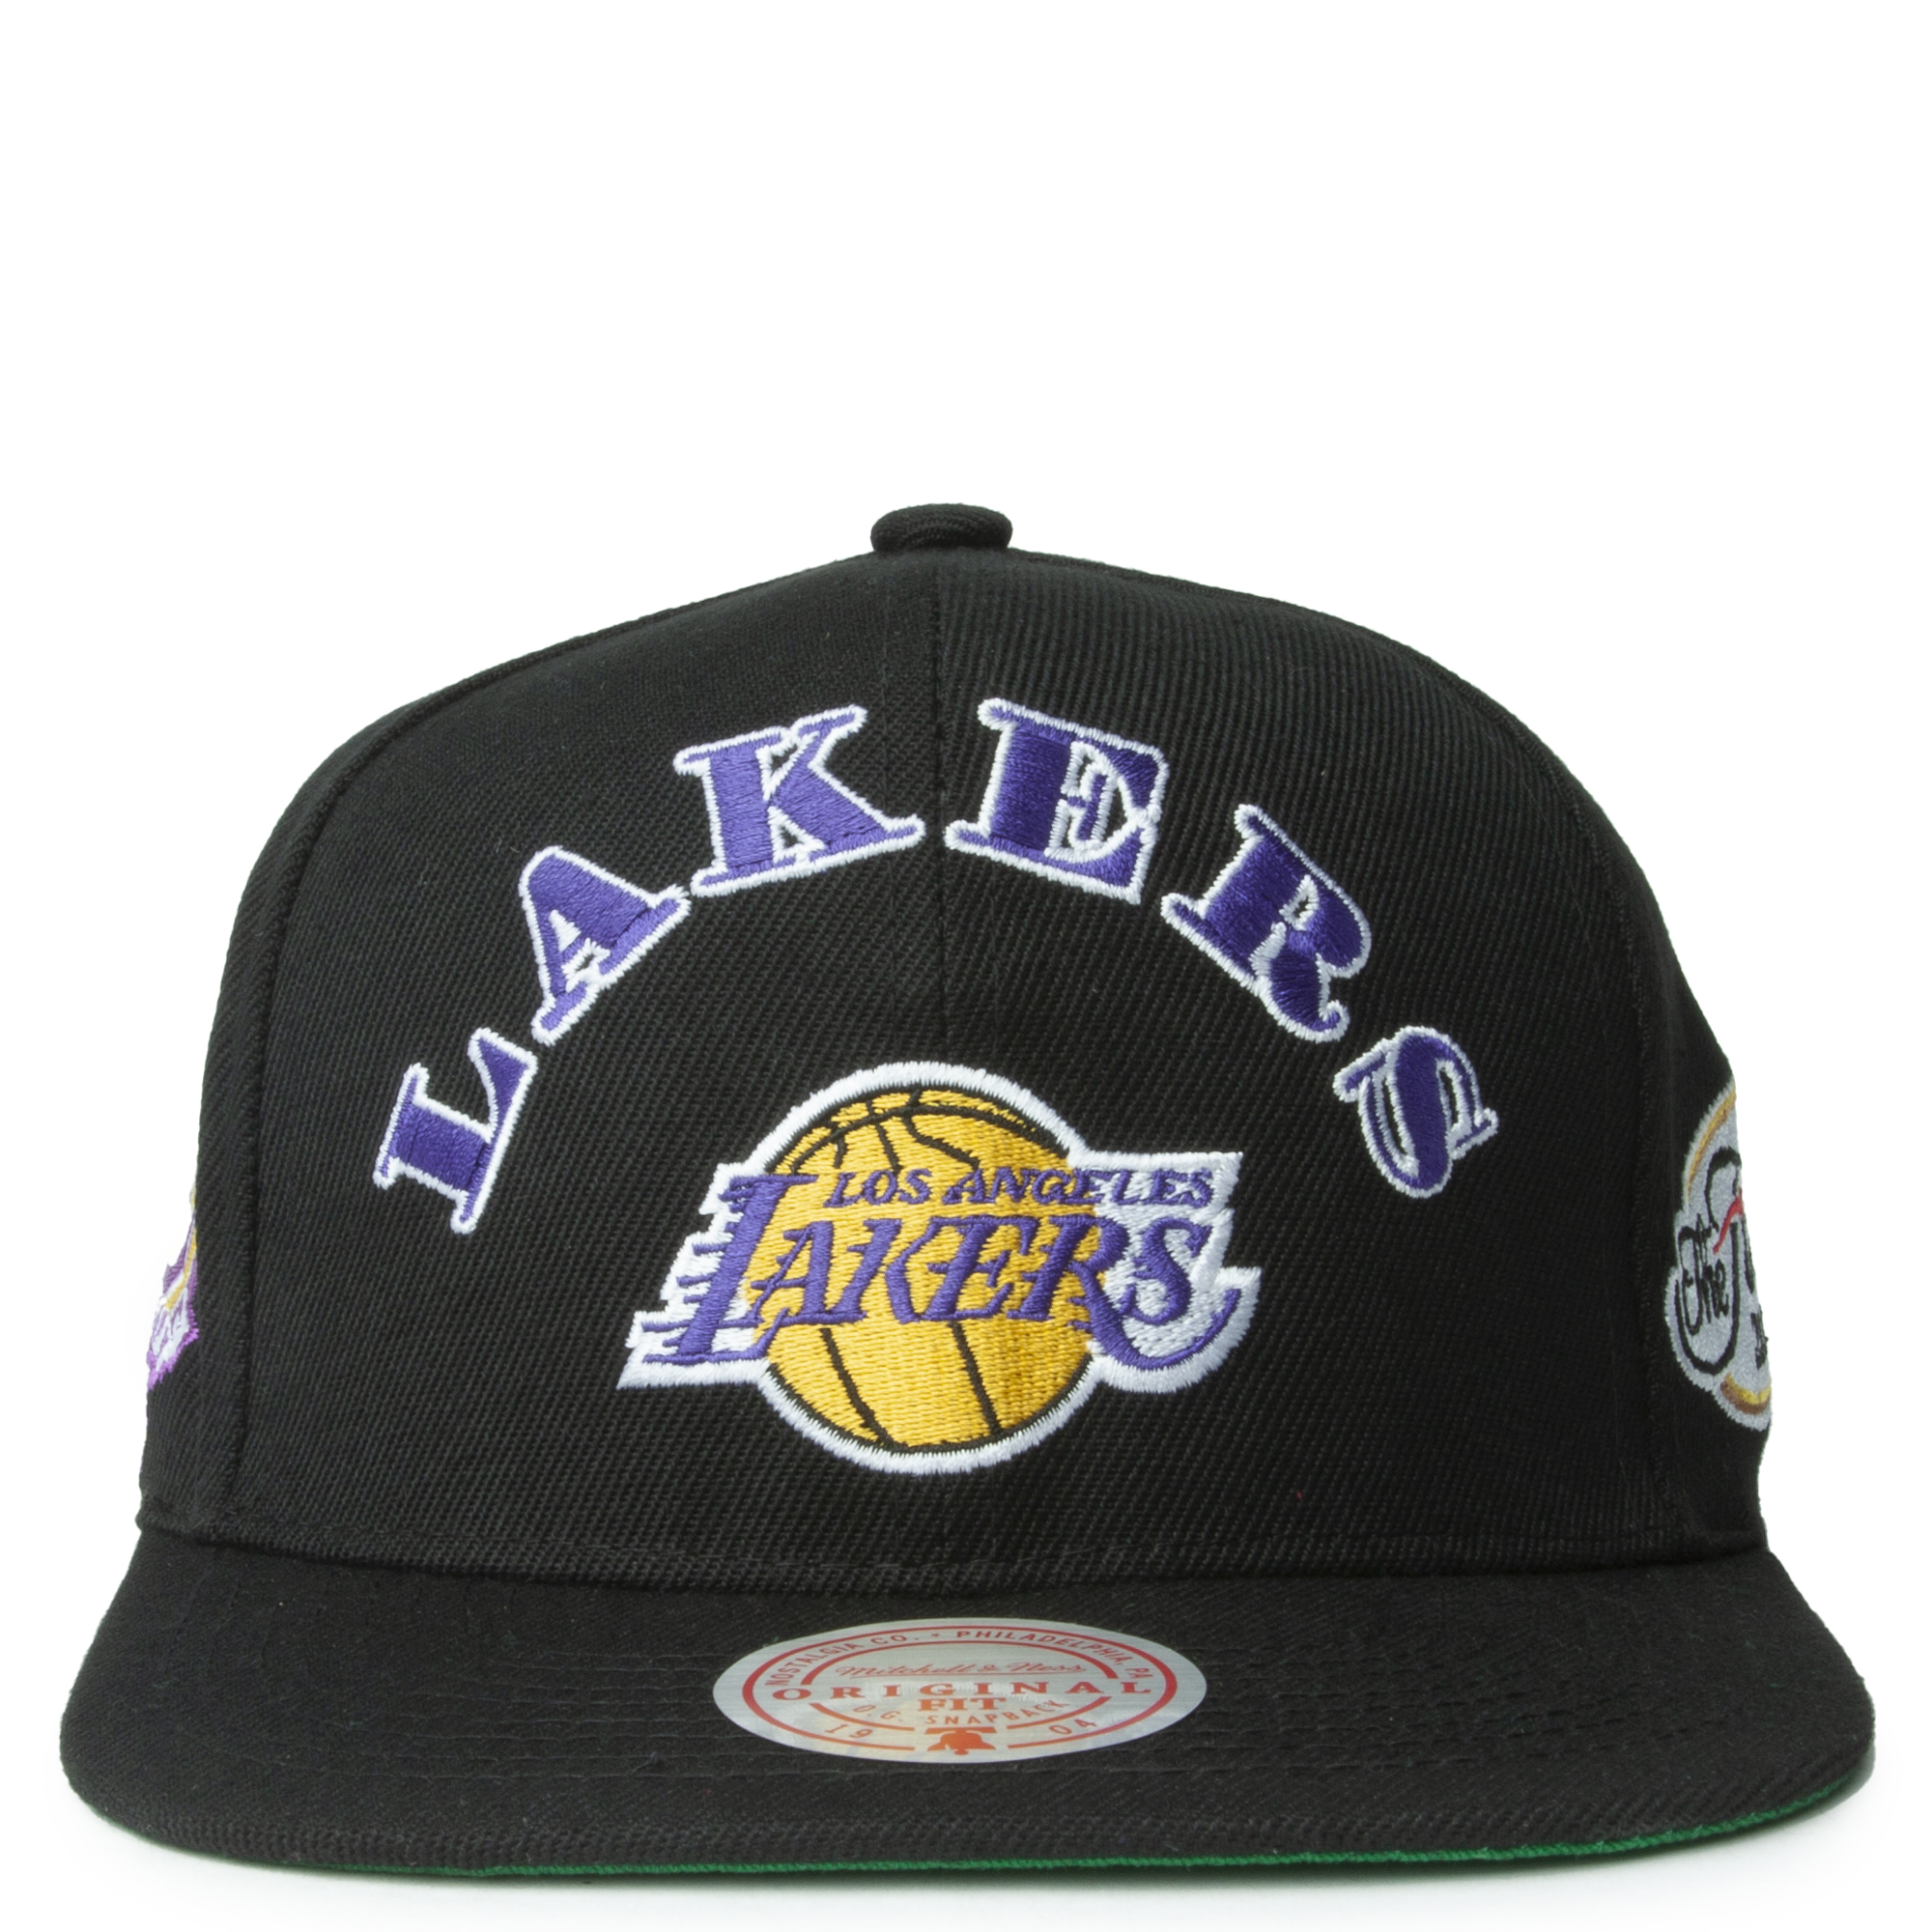 Los Angeles Lakers 186 Red Grey/Black Adjustable - Mitchell & Ness